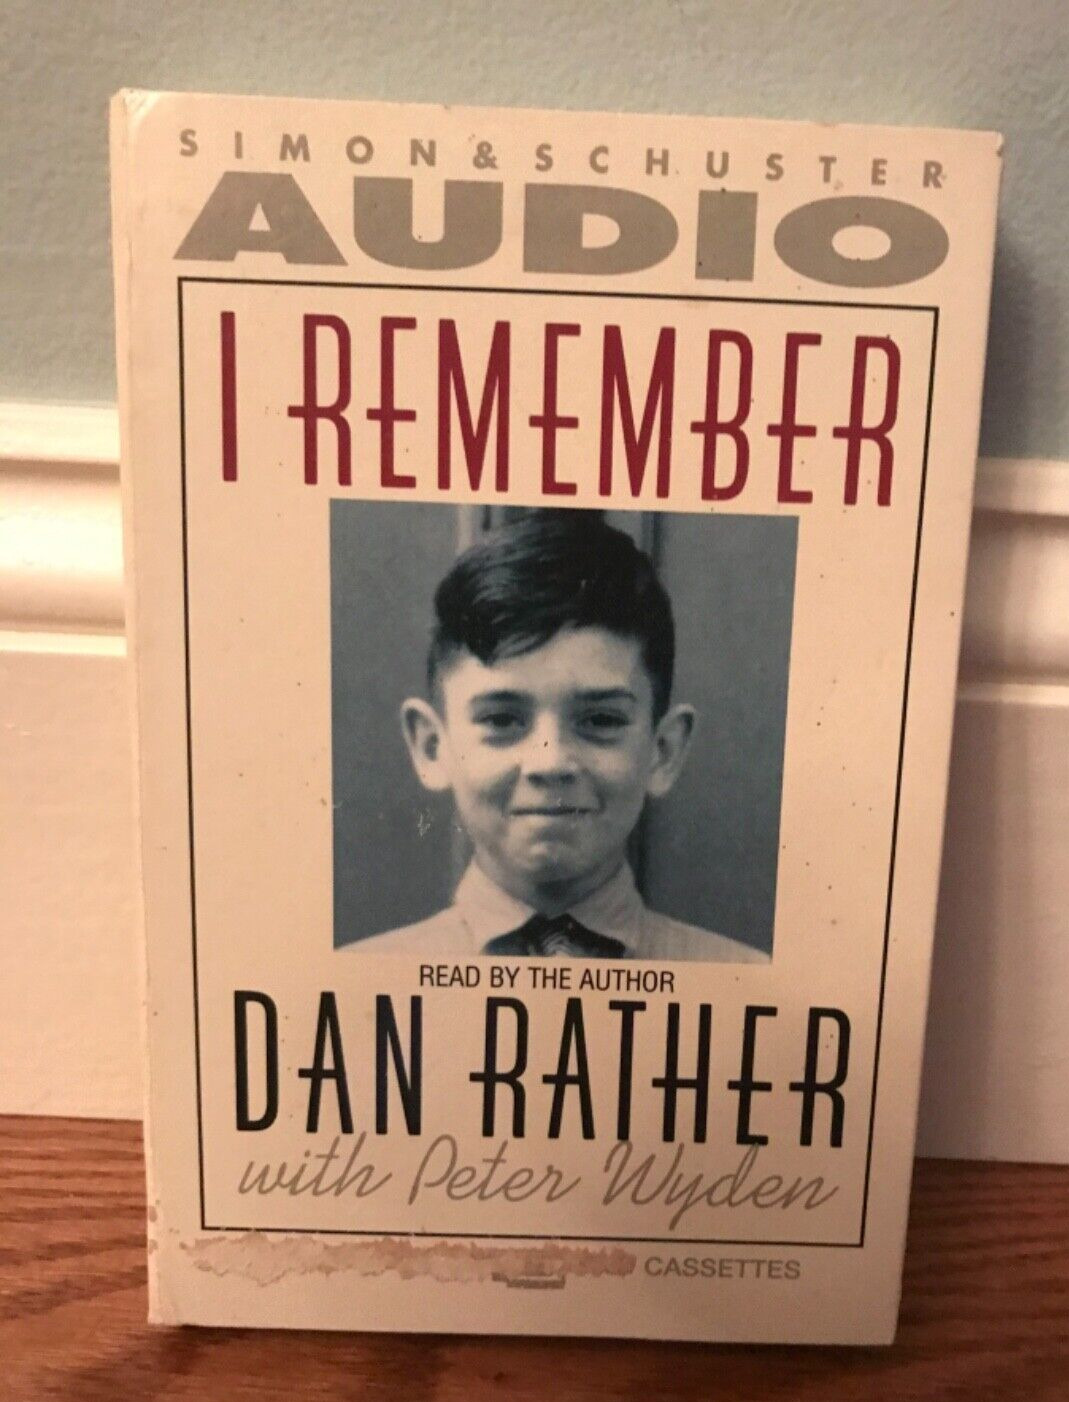 I Remember by Dan Rather Peter Wyden 2 Audio Cassettes Simon & Schuster